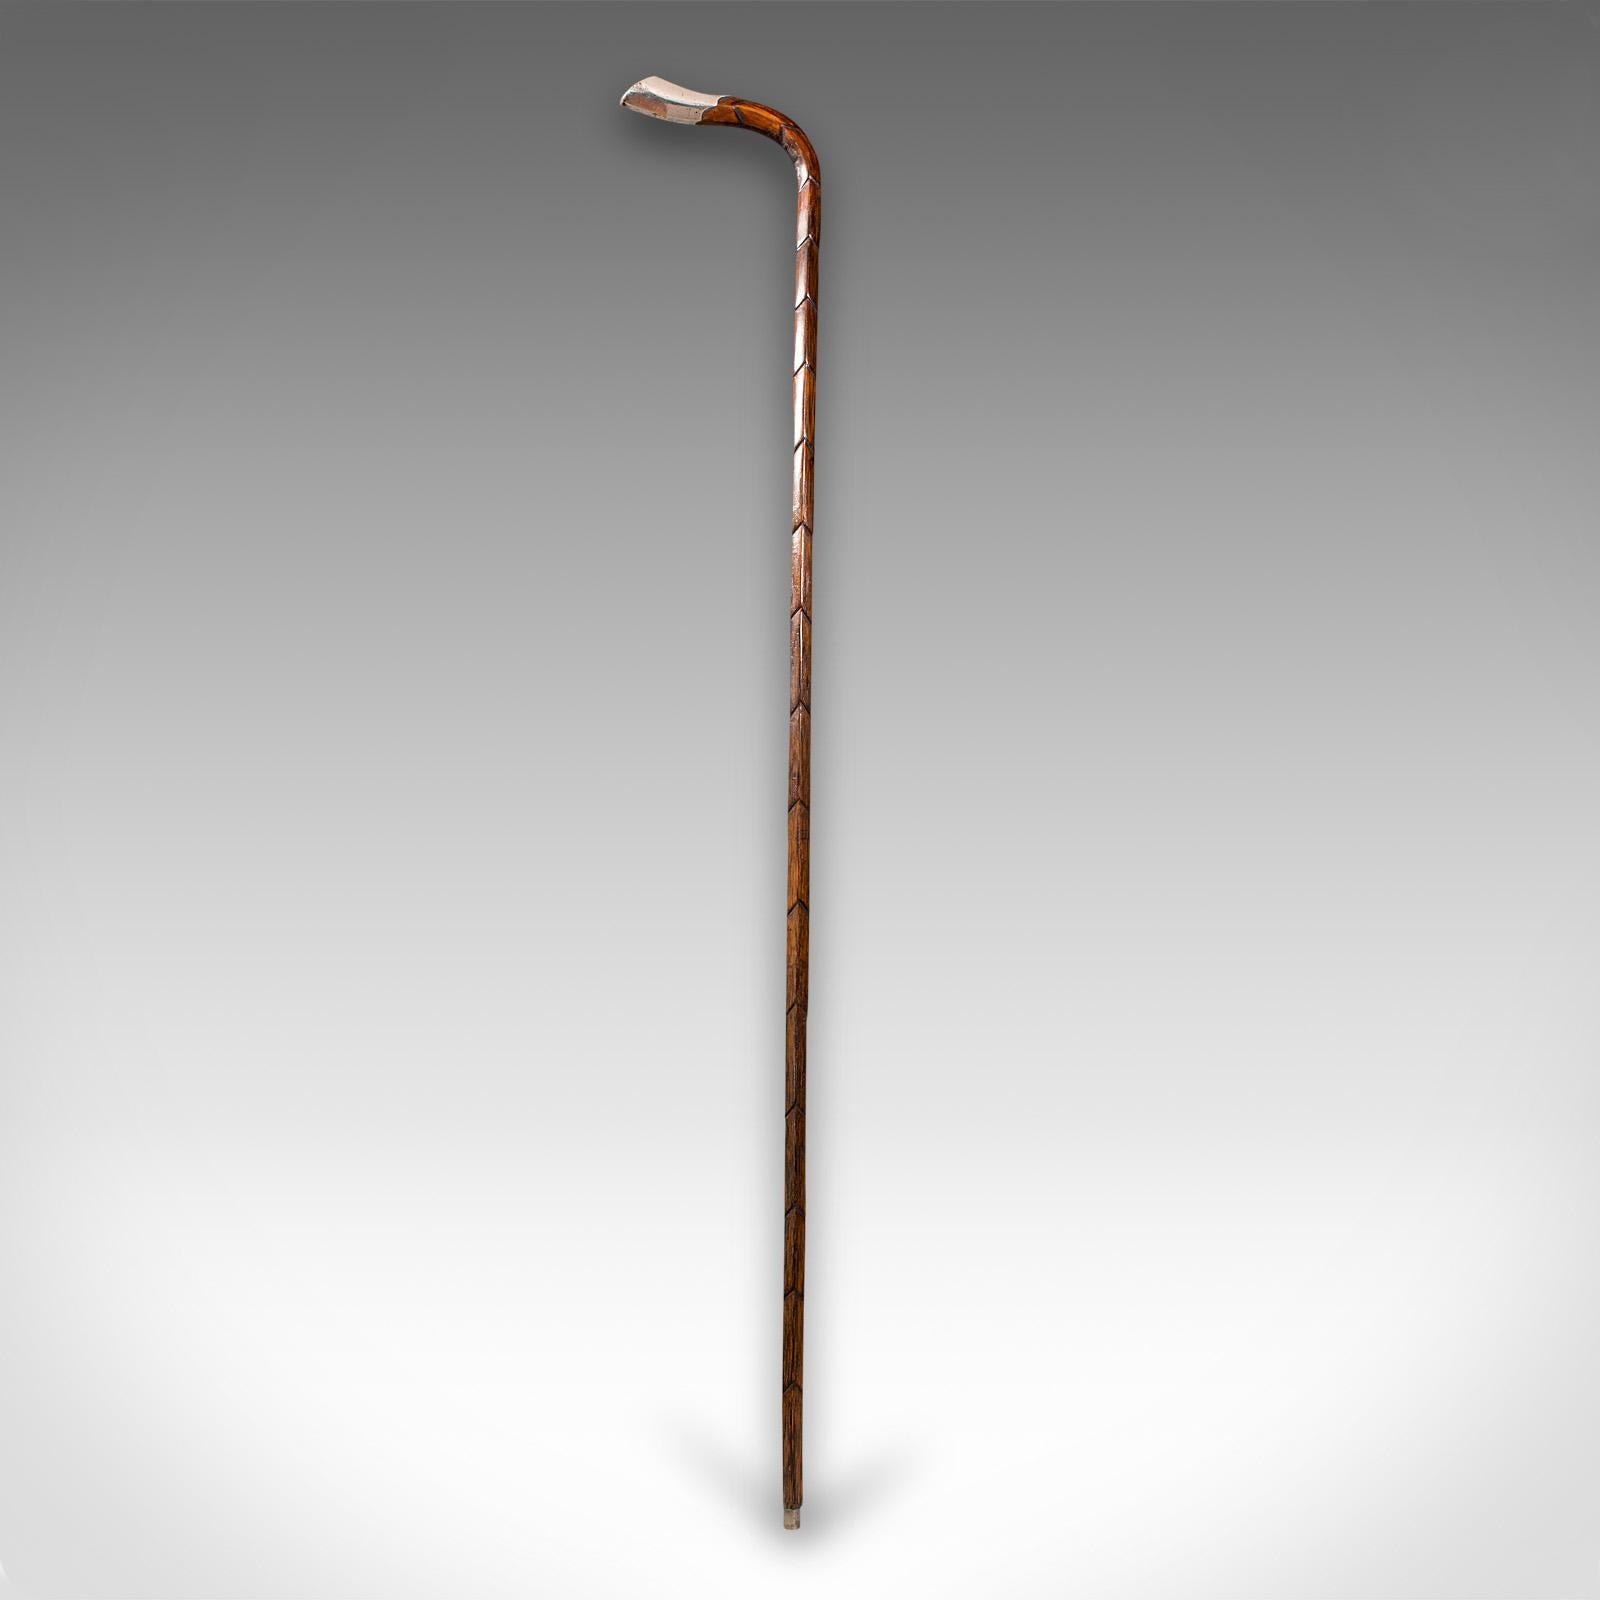 This is an antique gentleman's walking stick. An English, coromandel and silver cane with hallmarks, dating to the Edwardian period, 1904.

A dashing cane, ideally suited to the discerning Flâneur or a walk along a promenade
Displays a desirable